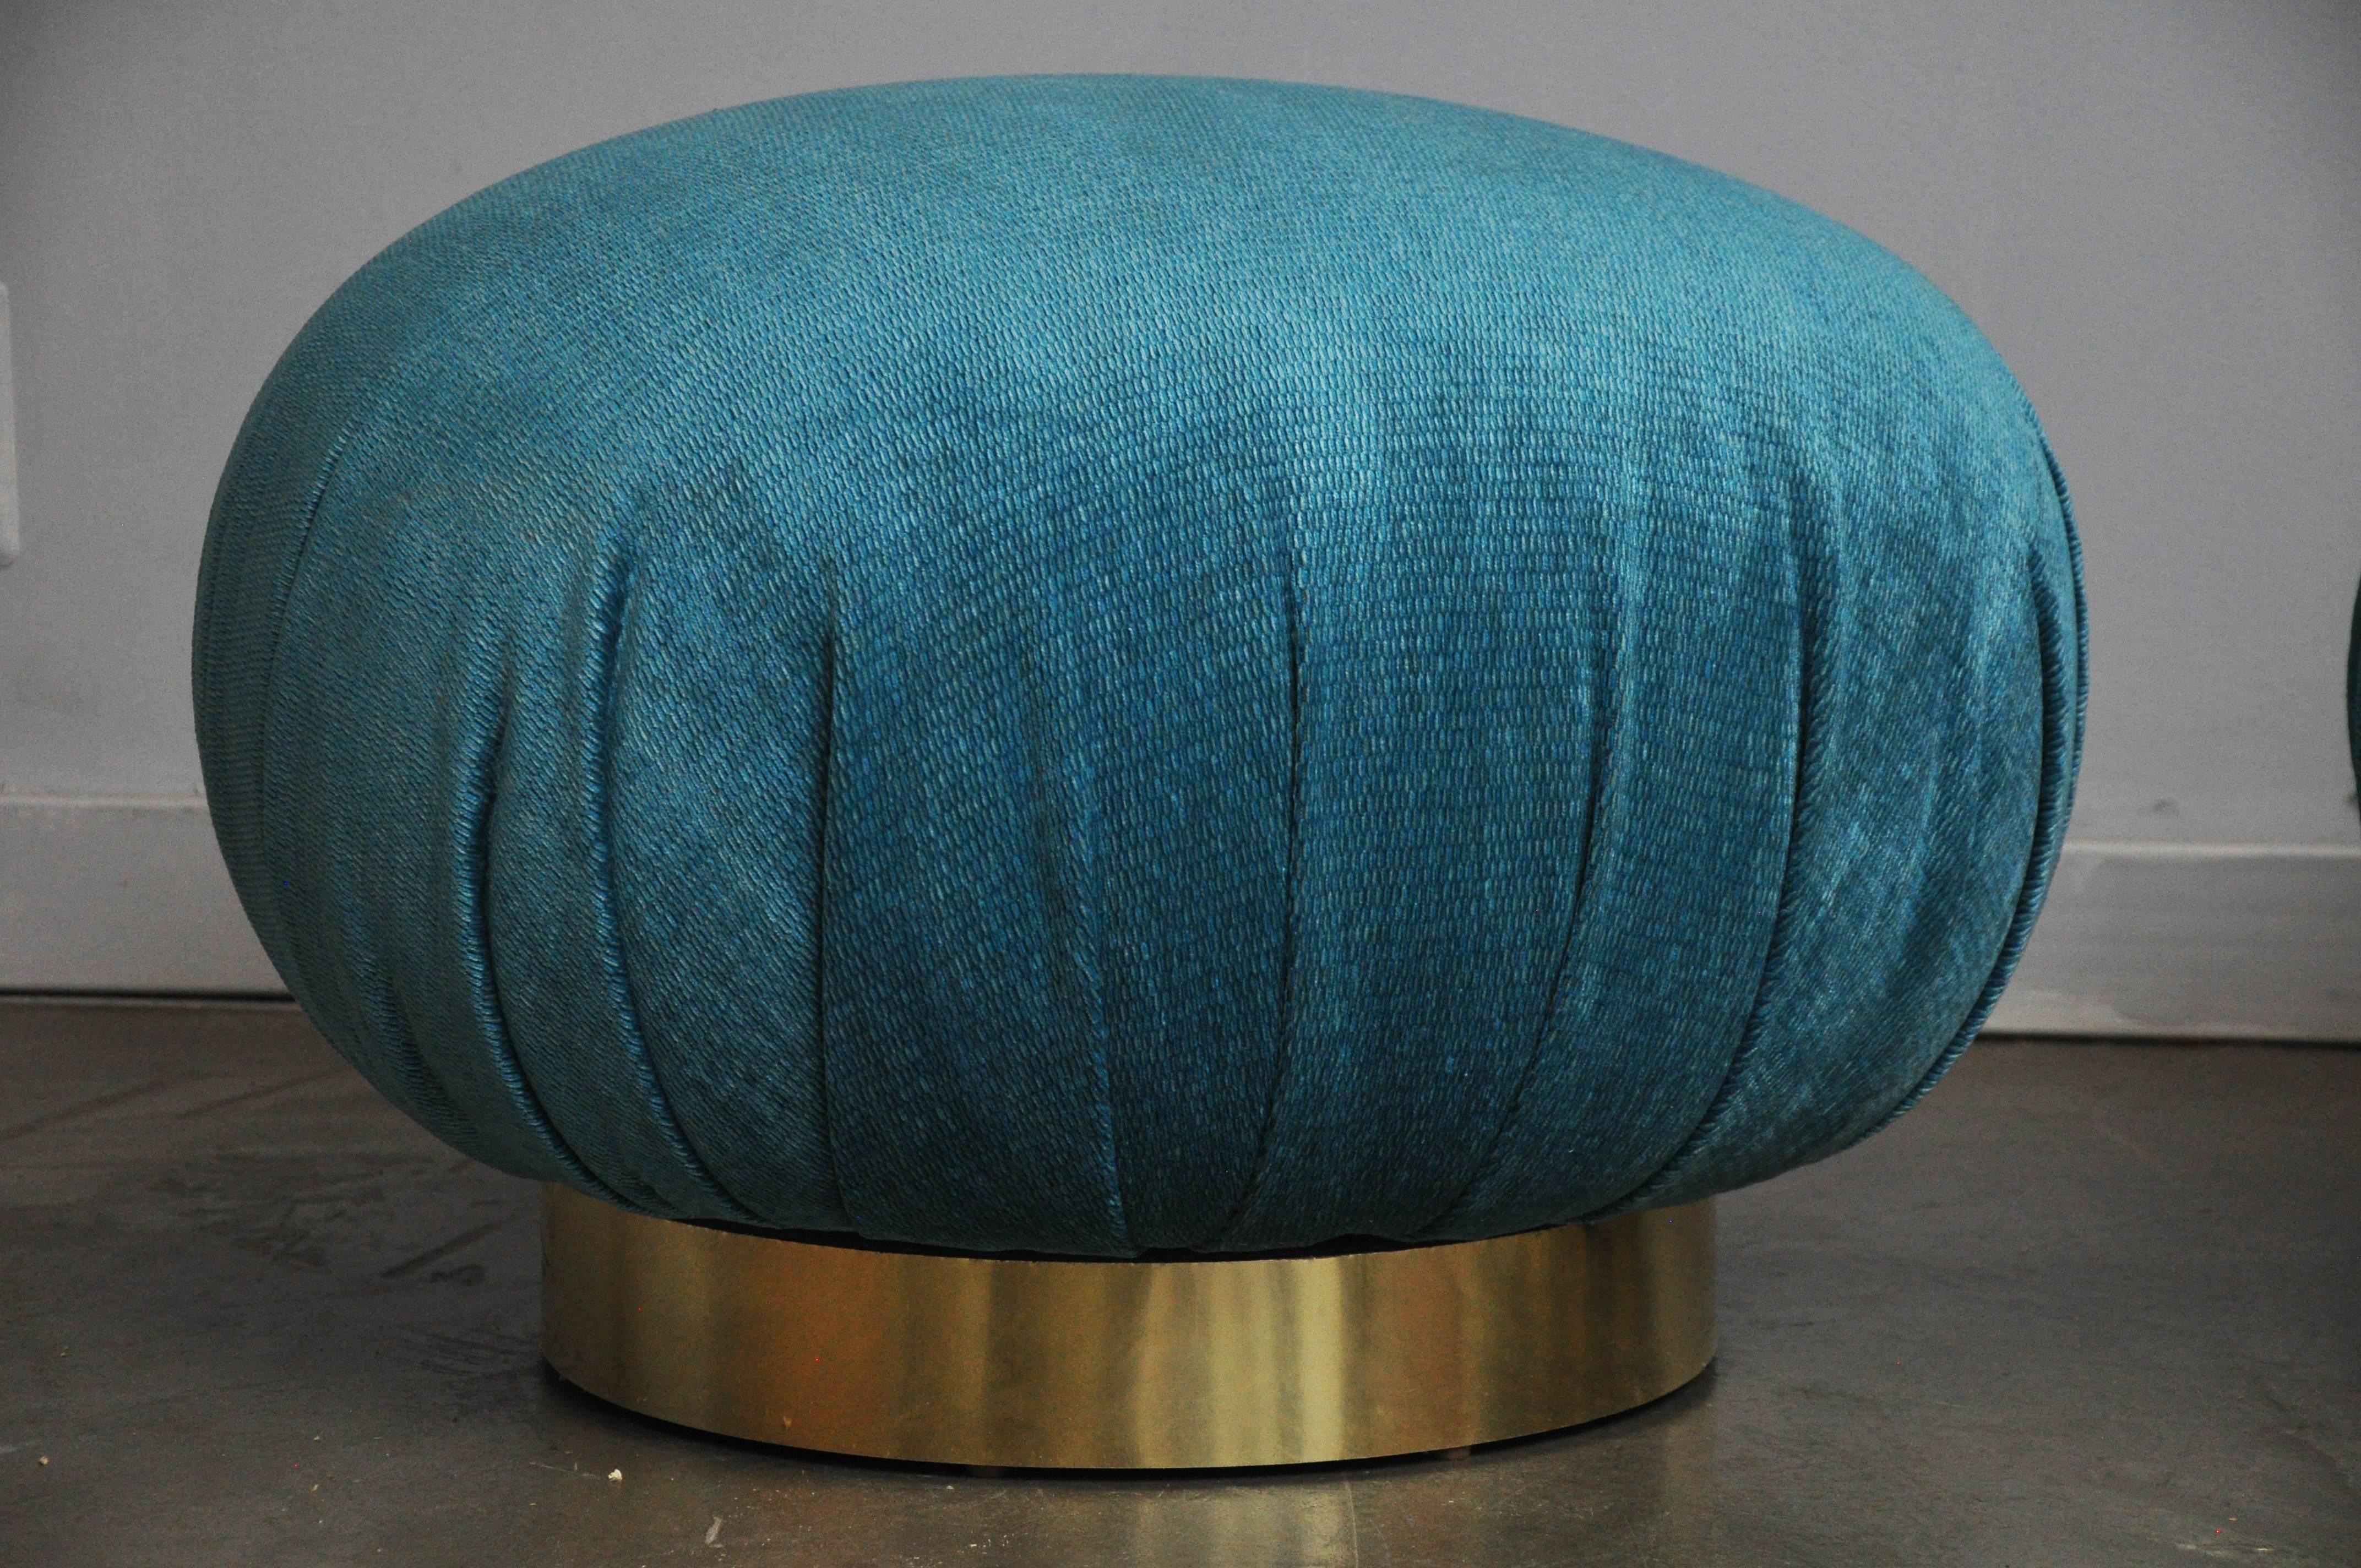 Pair of swivel pouf ottomans stools by Adrian Pearsall for Comfort Designs. Fully restored and reupholstered in turquoise chenille velvet over brass bases.